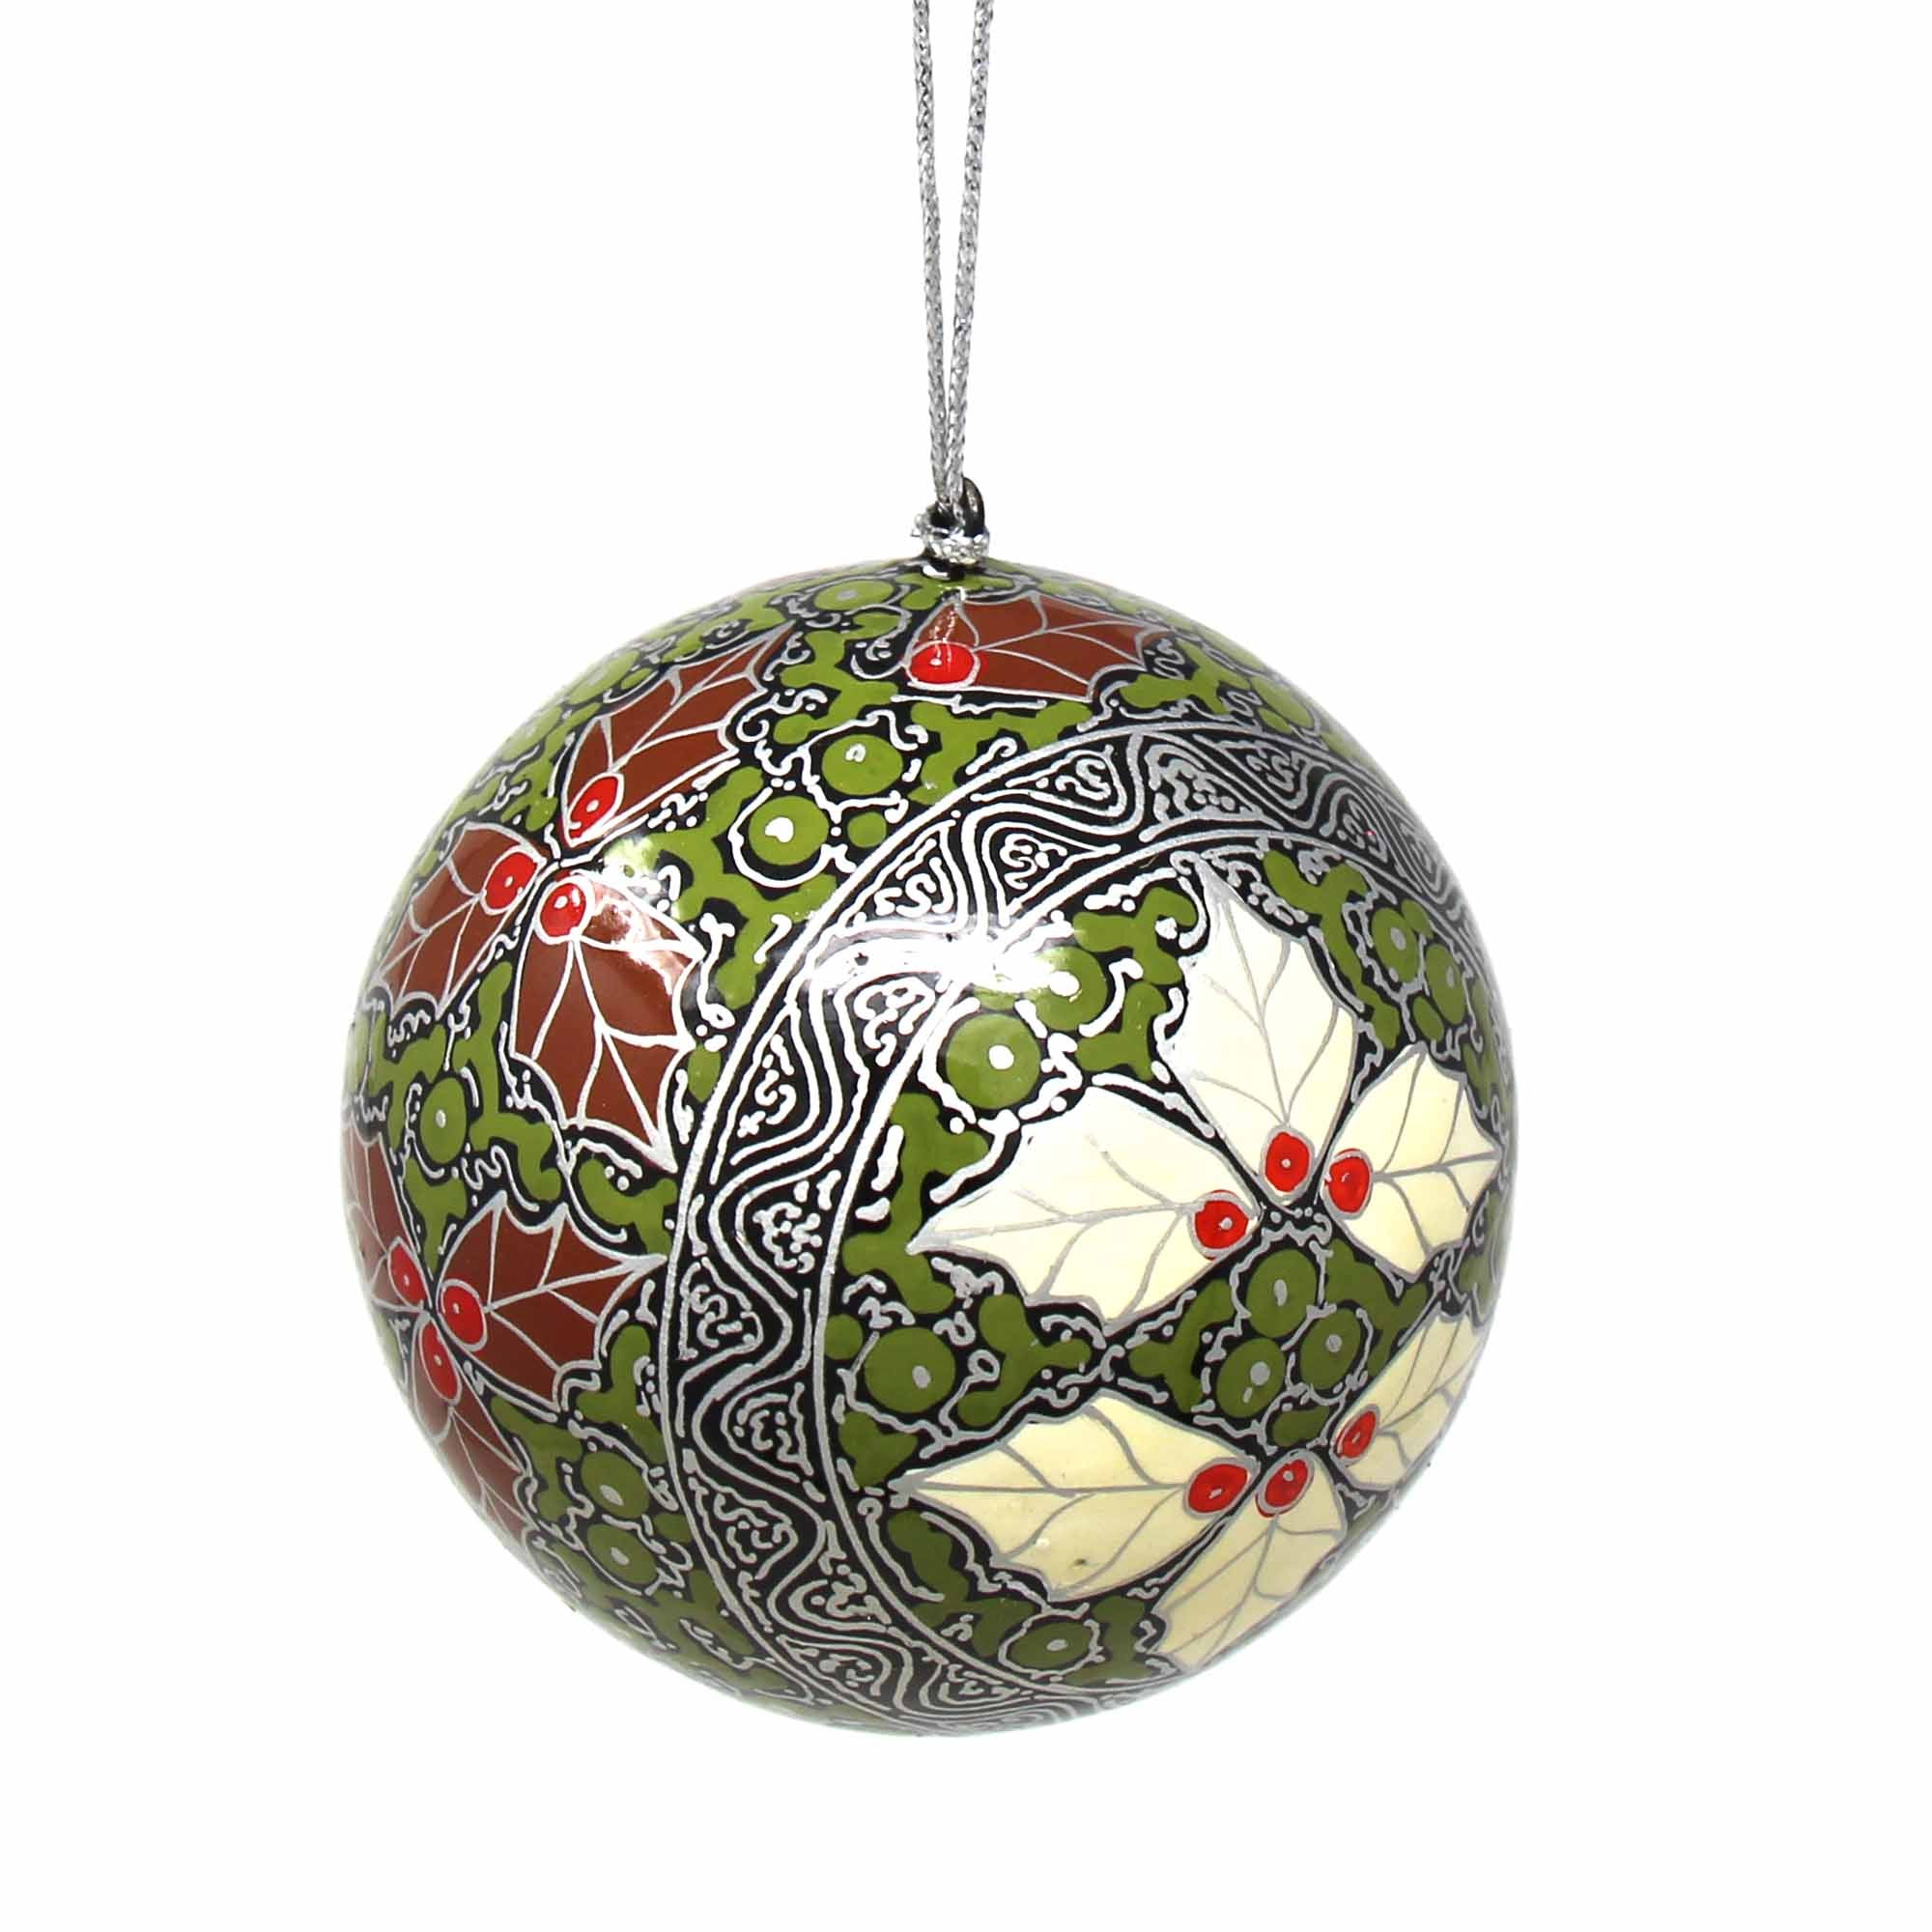 Handpainted Ornaments, Silver Chinar Leaves - Pack of 3